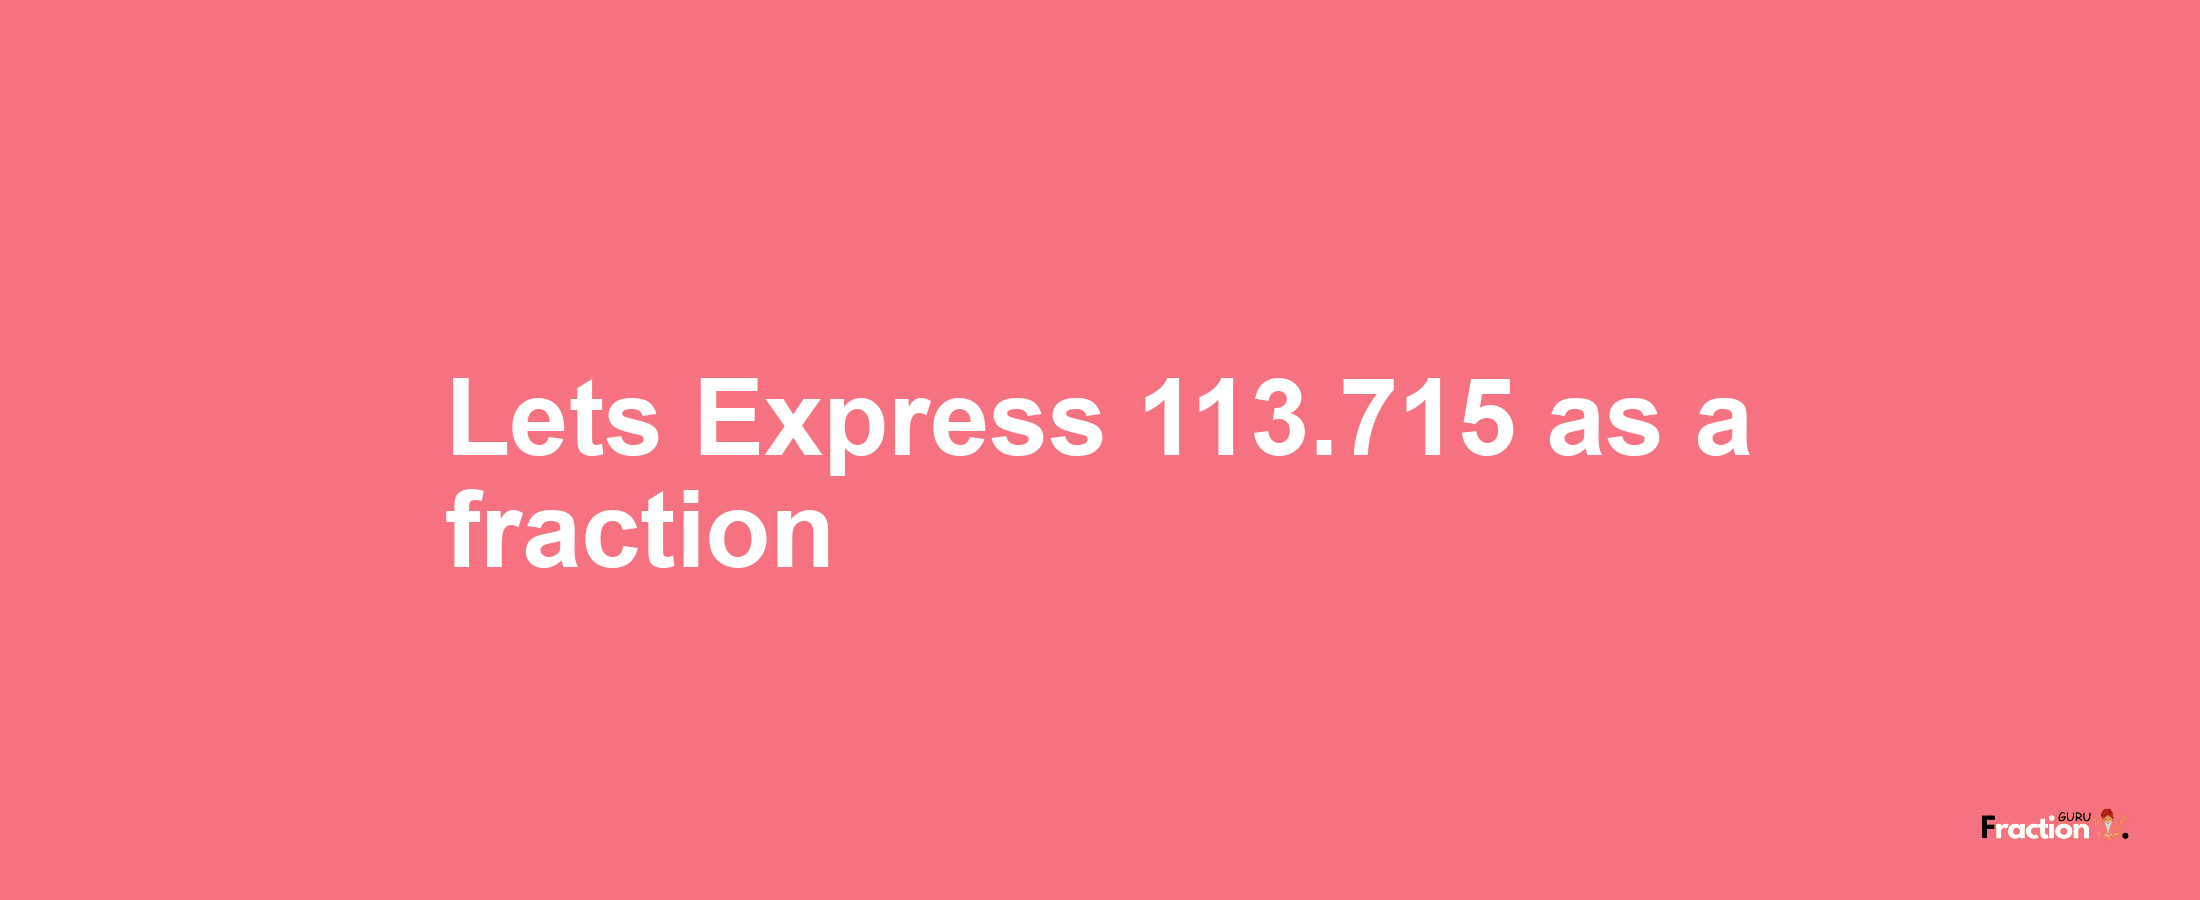 Lets Express 113.715 as afraction